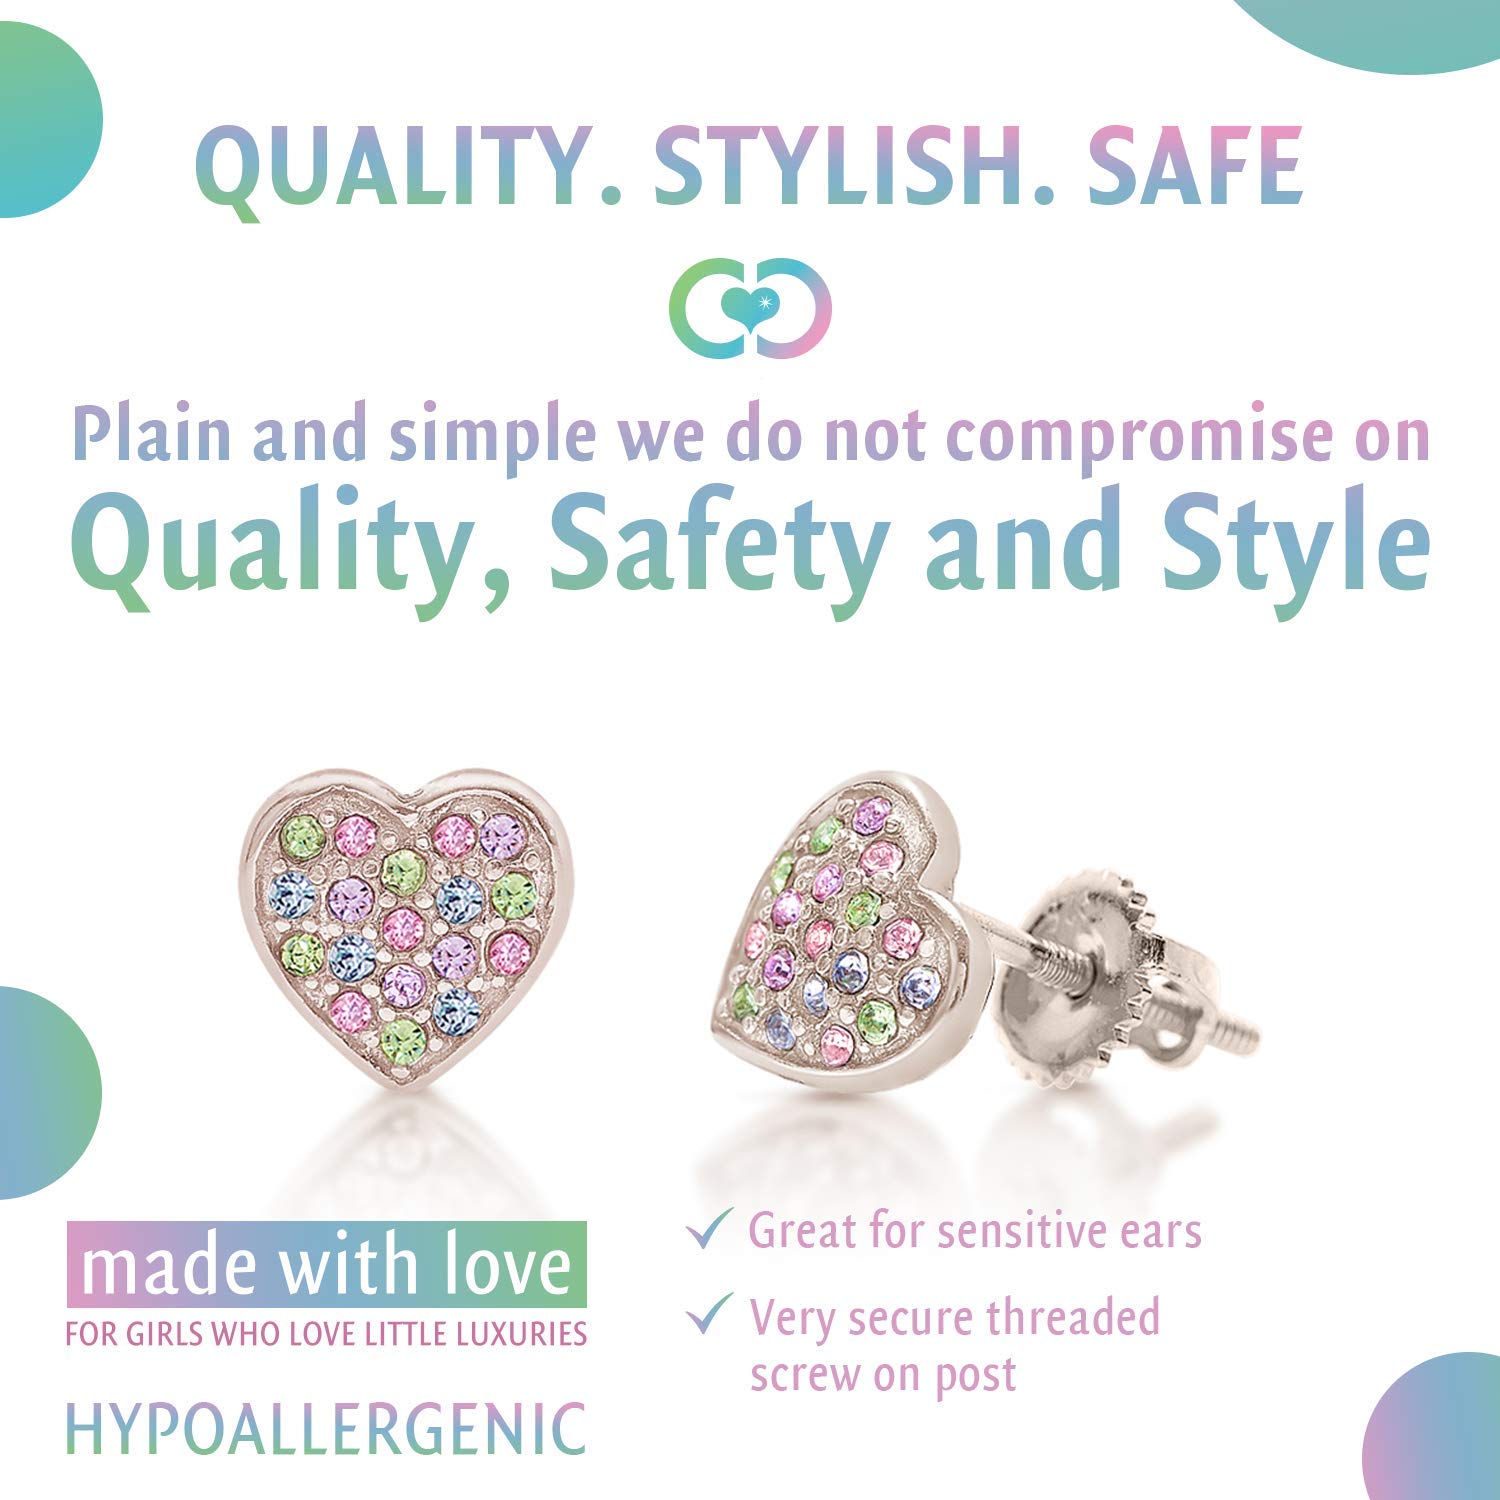 925 Sterling Silver with a 7mm White Gold Tone Heart Screwback Children's Earrings